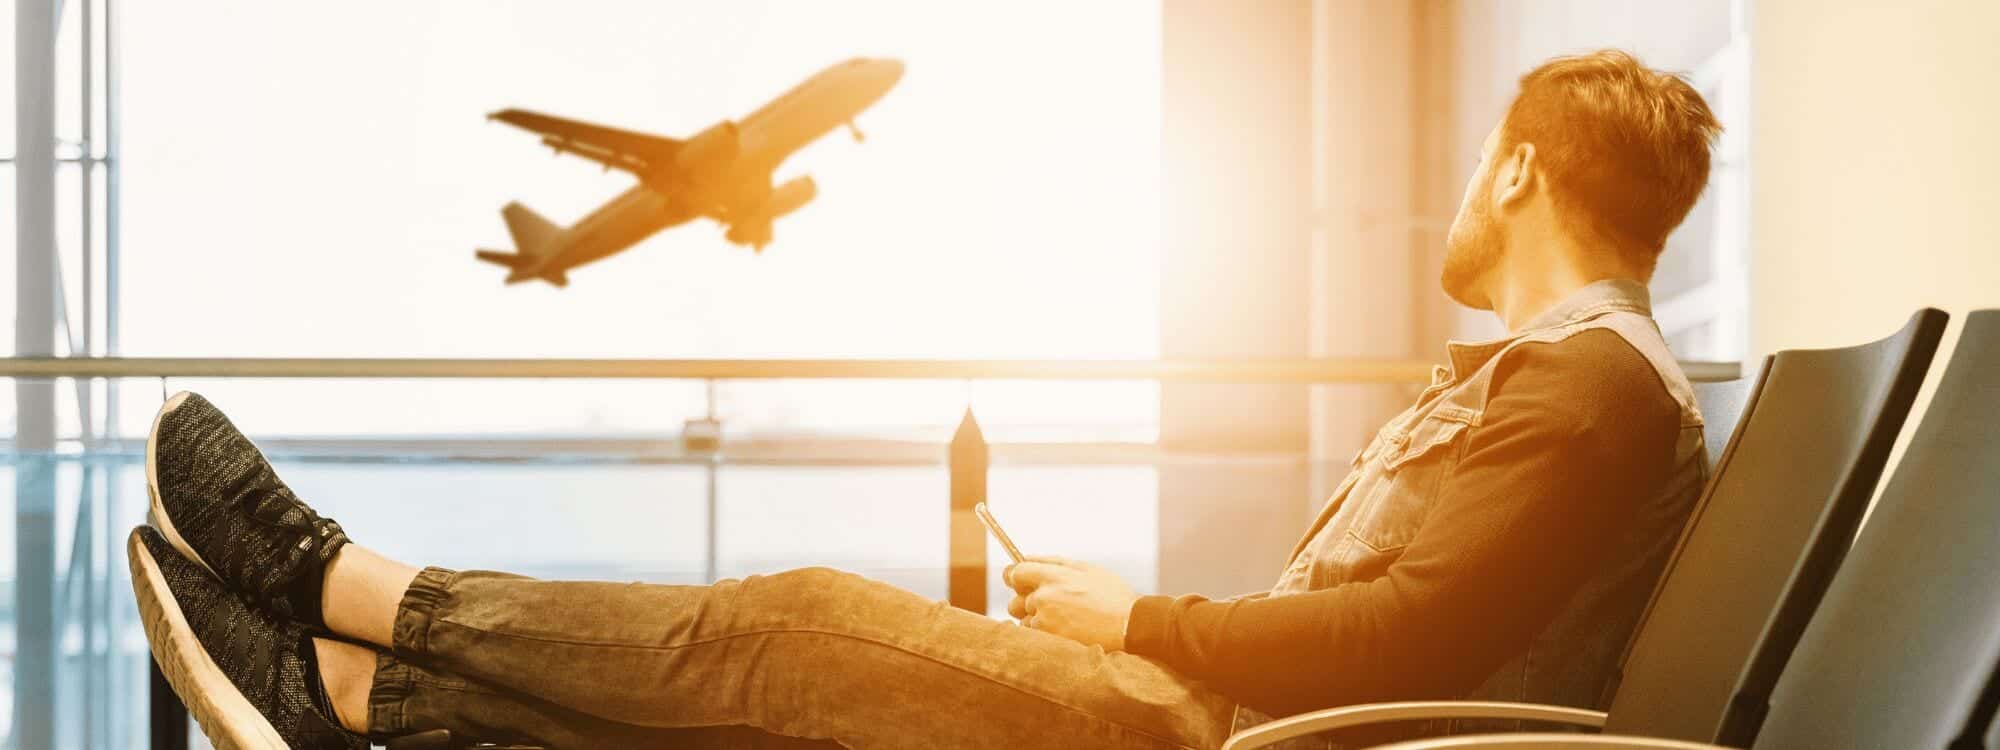 A man sitting in the airport watches as a plane takes off amid higher living costs, resulting in course price changes coming for Southpac Aerospace in 2020.